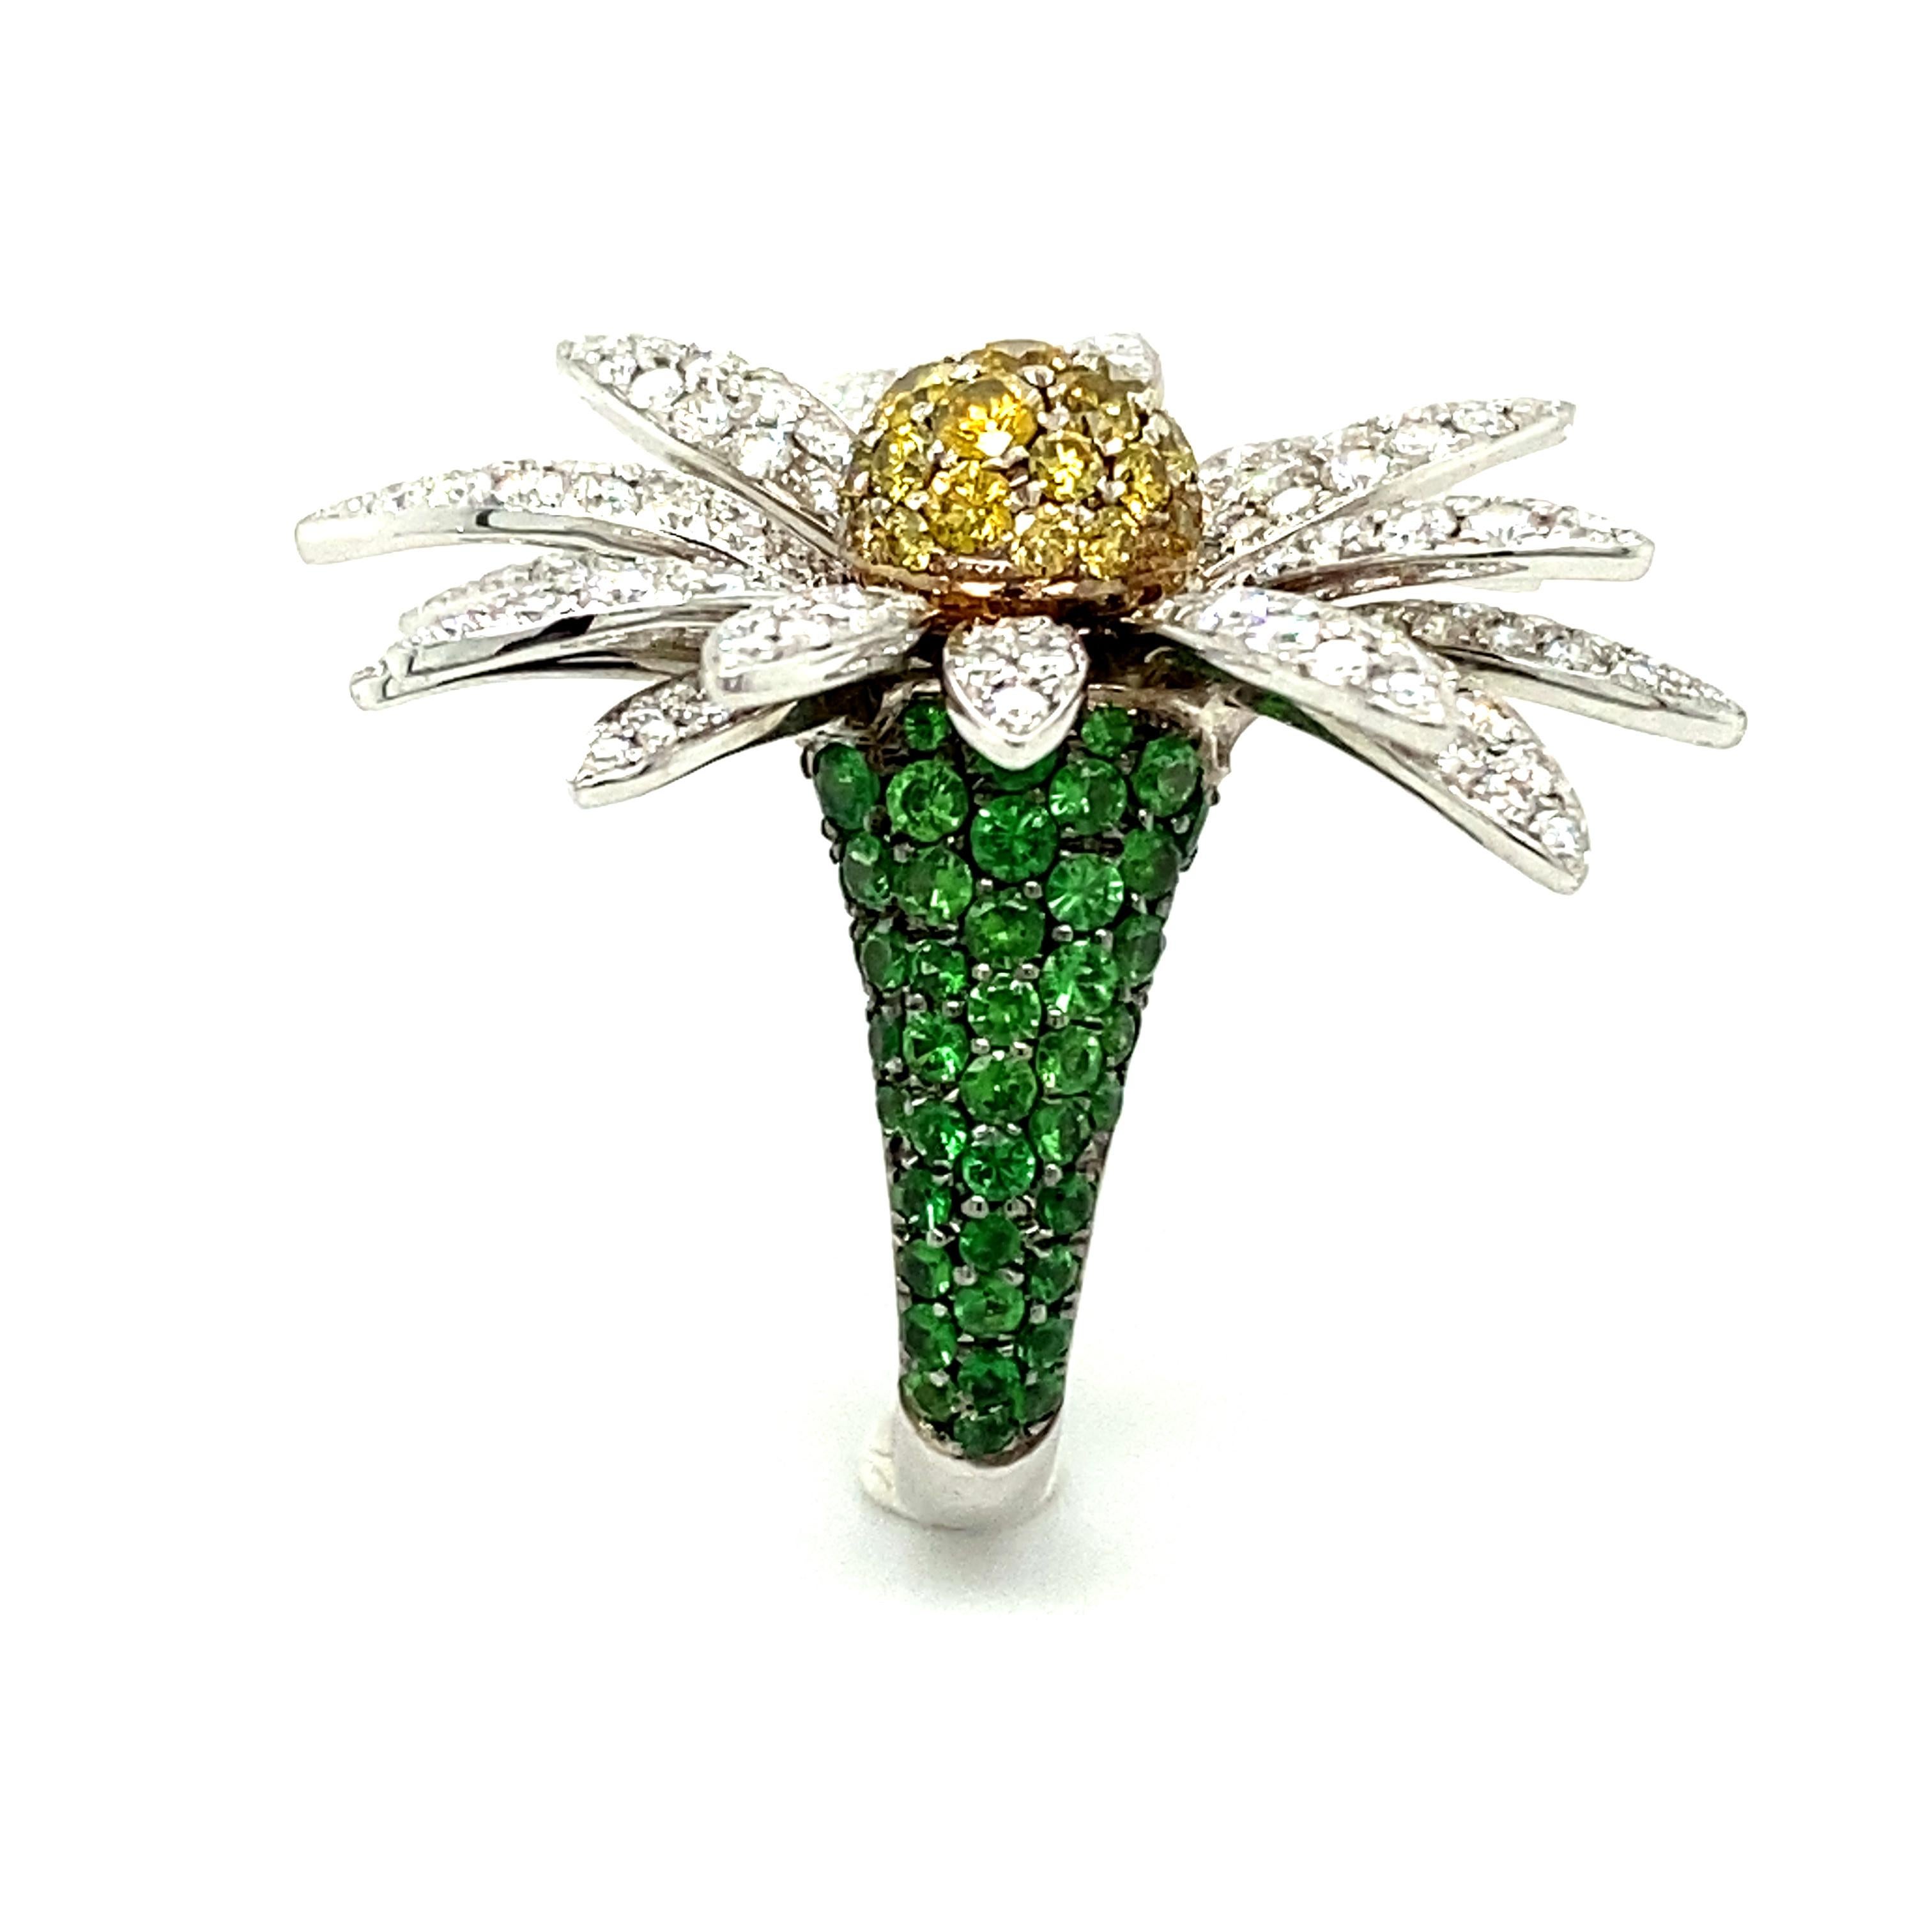 Daisy Ring with Diamonds and Tsavorites in 18 Karat White Gold by SILLAM 1835 9